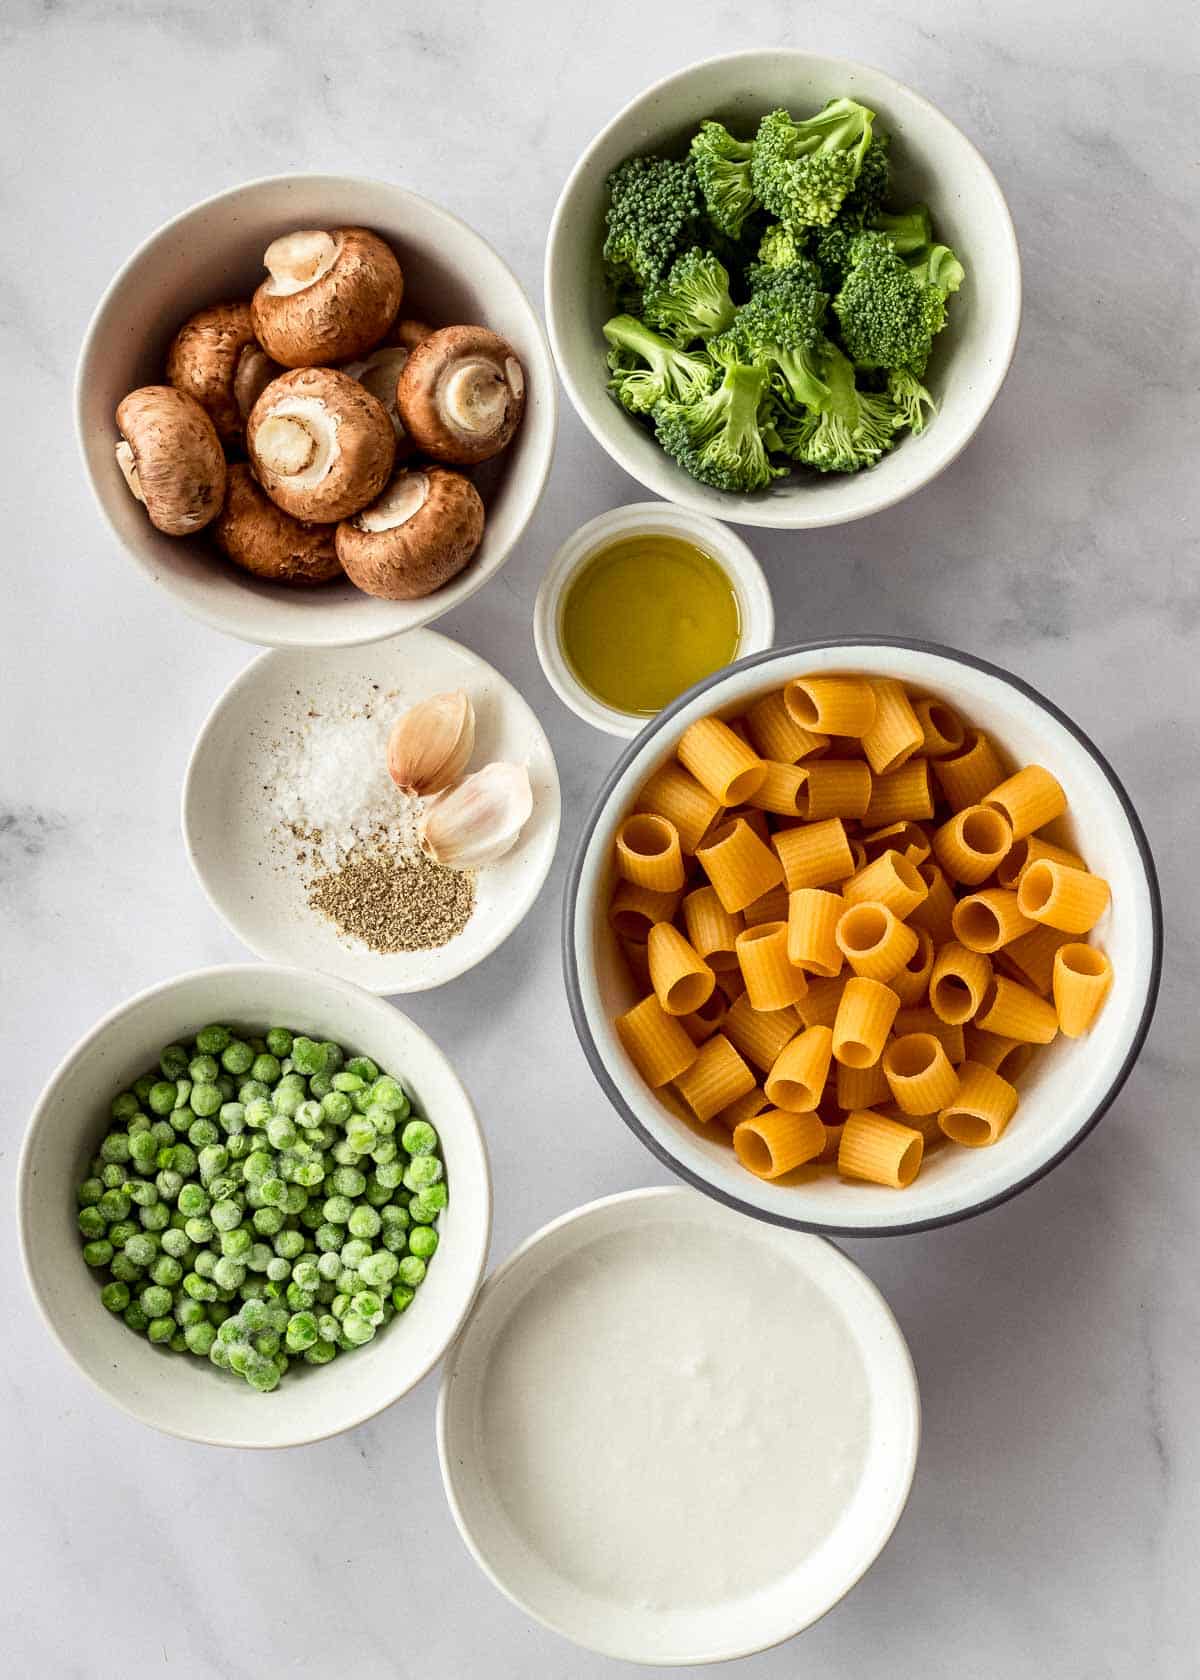 Ingredients for pasta with broccoli and mushrooms.